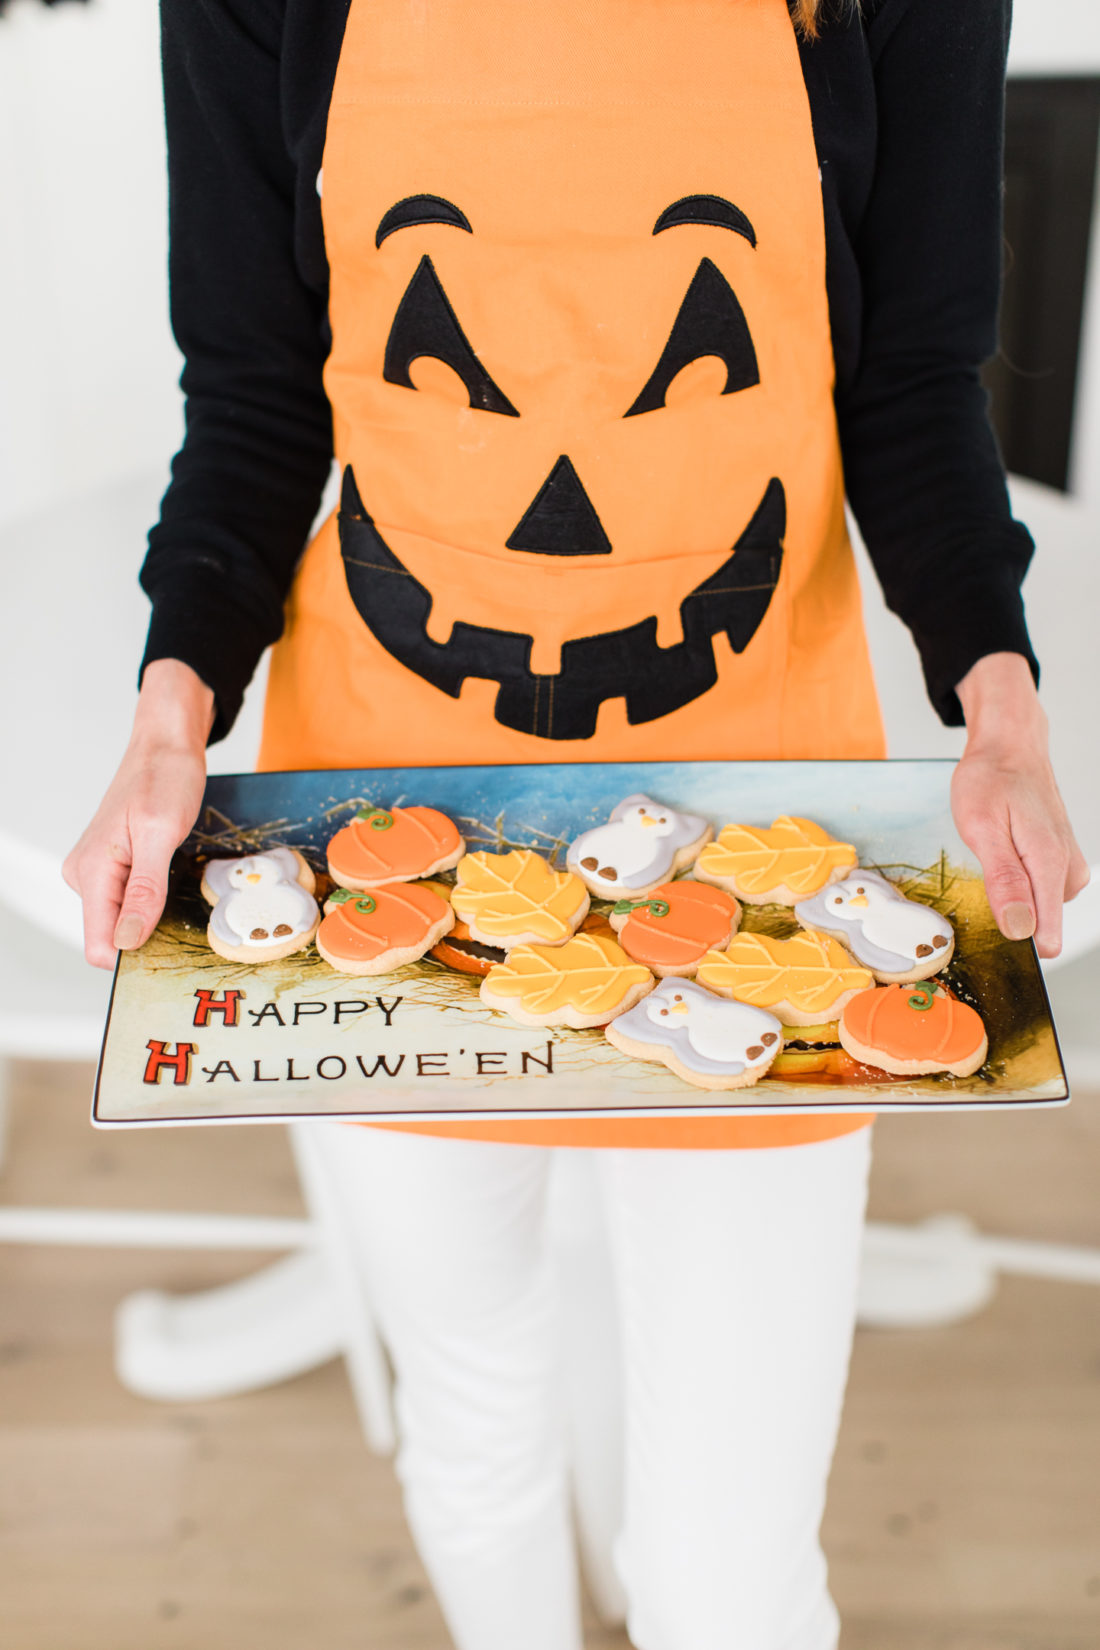 Eva Amurri Martino wears a jack-o-lantern apron and holds a tray of fall-themed cookies for her guests